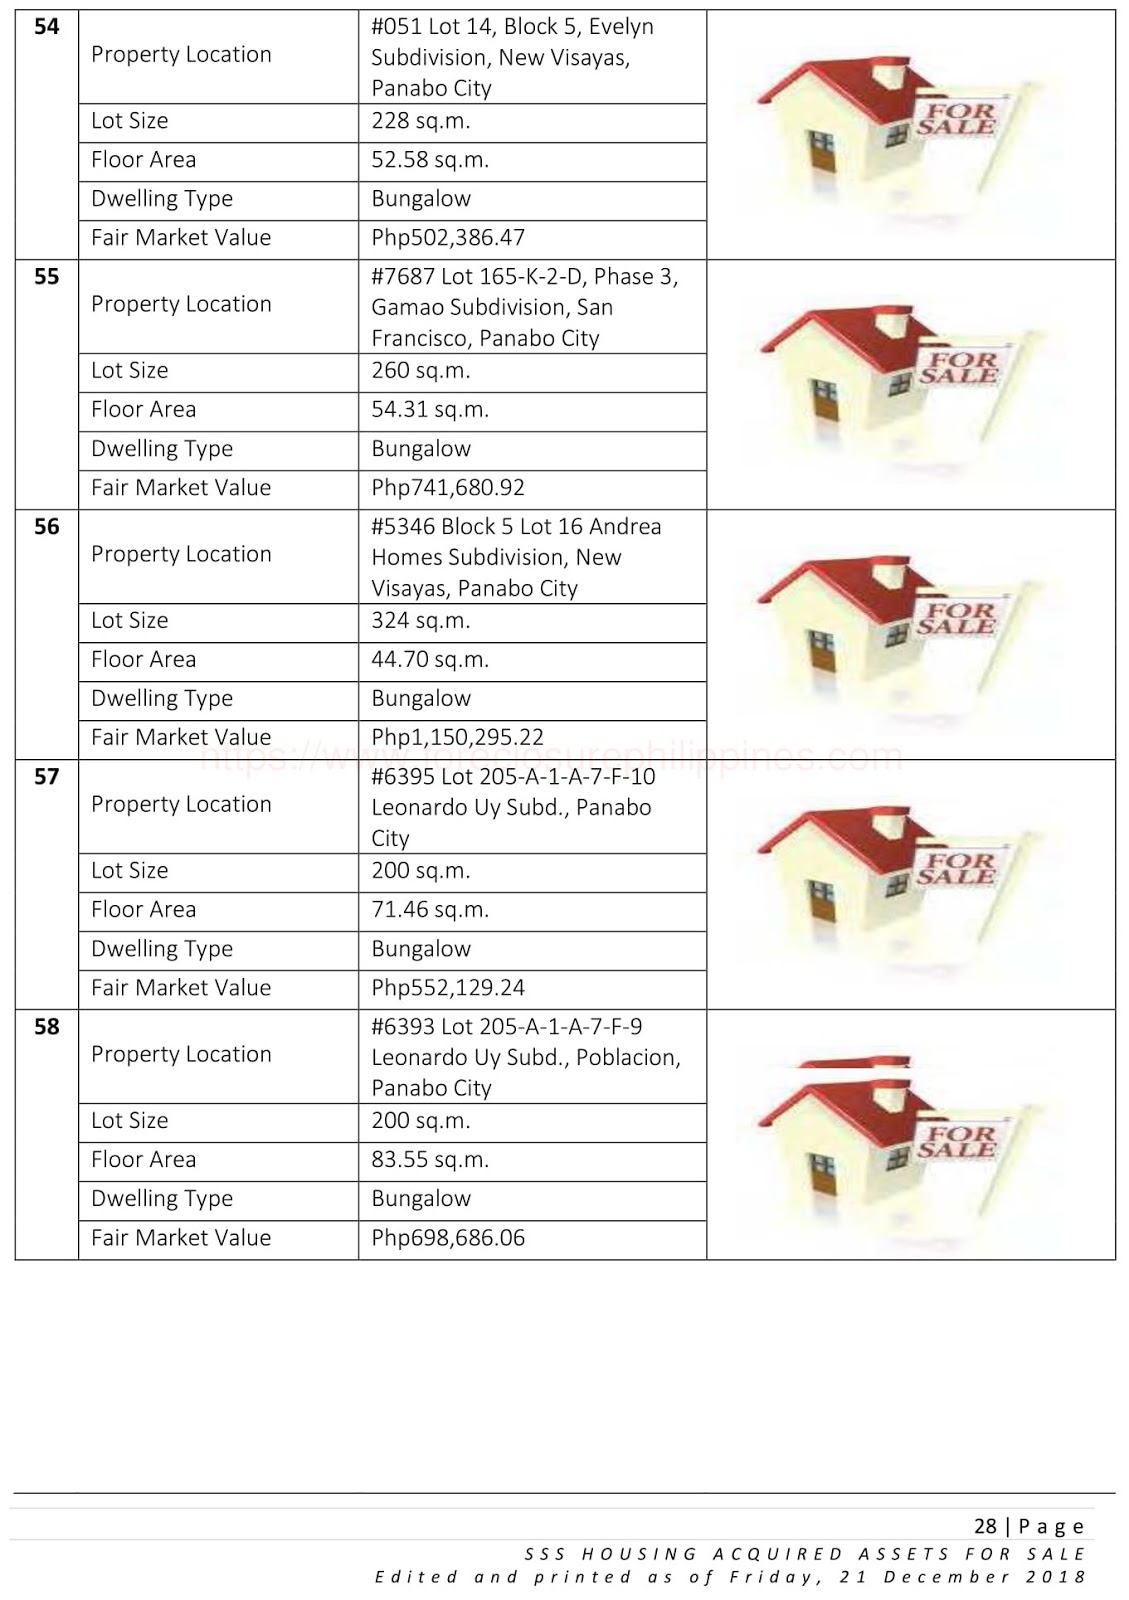 If you are looking for properties to acquire this 2019, here are some real-estate properties from Social Security System (SSS). The following are a total of 176 foreclosed properties for sale nationwide! These properties are available for negotiated sale so check out below for the number of properties available per region!  Metro Manila (NCR): 12 Northern Luzon: 7 Central Luzon: 25 Southern Luzon: 9 Bicol Region: 2 Central Visayas: 1 Western Visayas: 13 Southern Mindanao: 104 Western Mindanao: 3